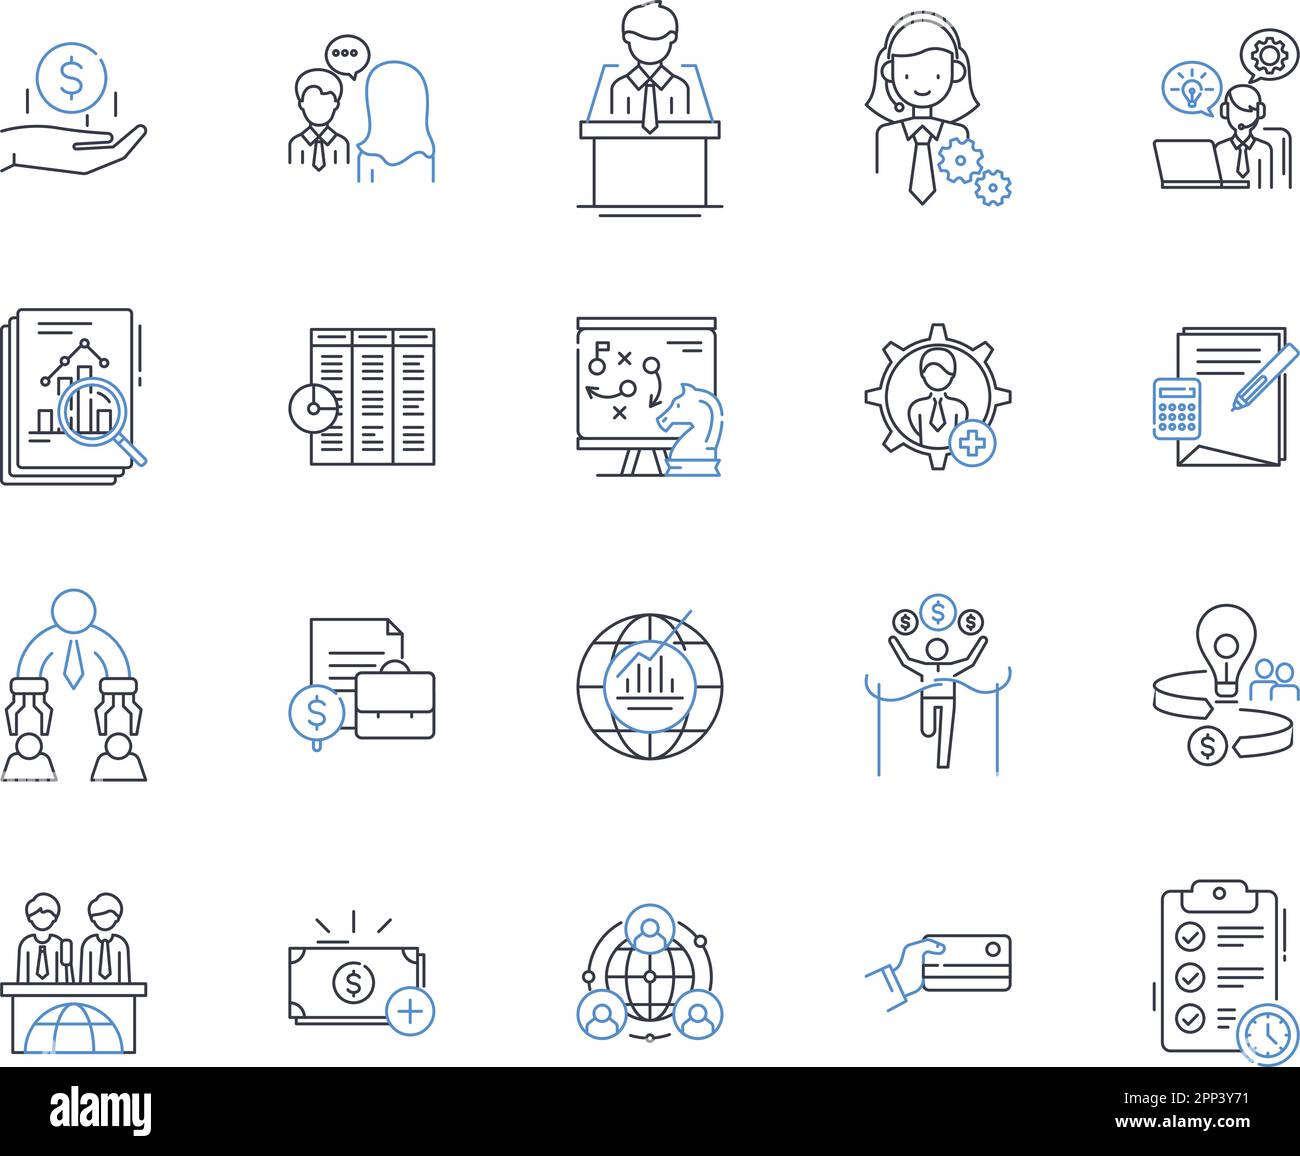 Fiscal strategy line icons collection. Budget, Revenue, Expenditure, Deficit, Surplus, Austerity, Taxation vector and linear illustration. Investment Stock Vector